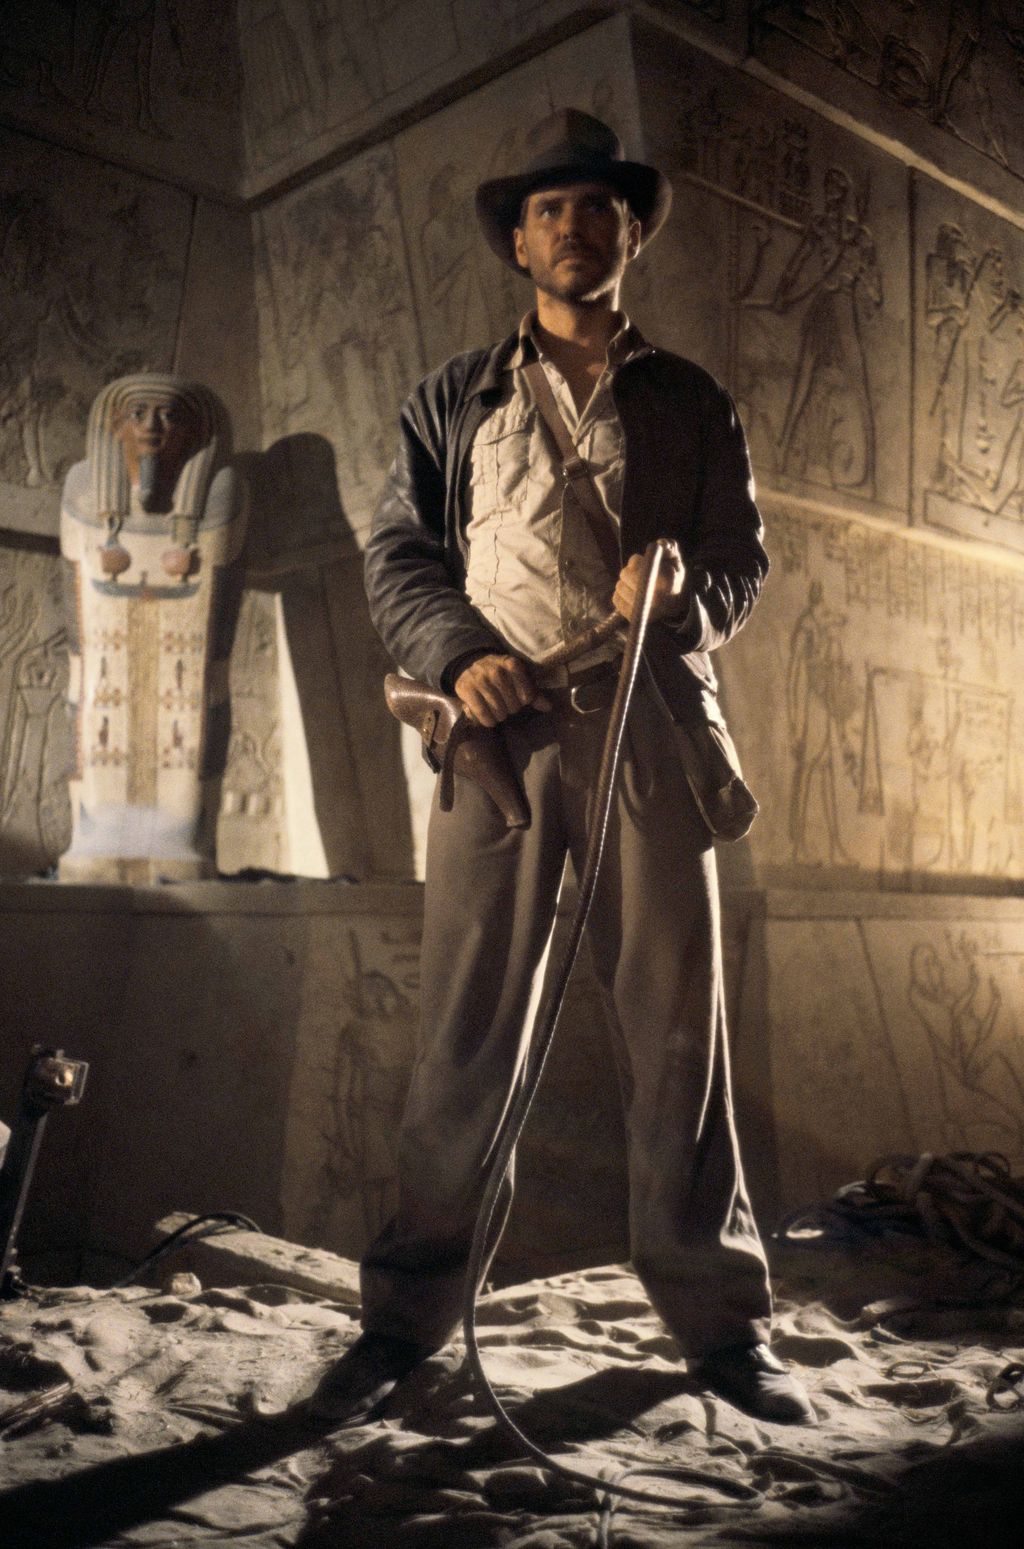 Harrison Ford as Indiana Jones in RAIDERS OF THE LOST ARK (1981)